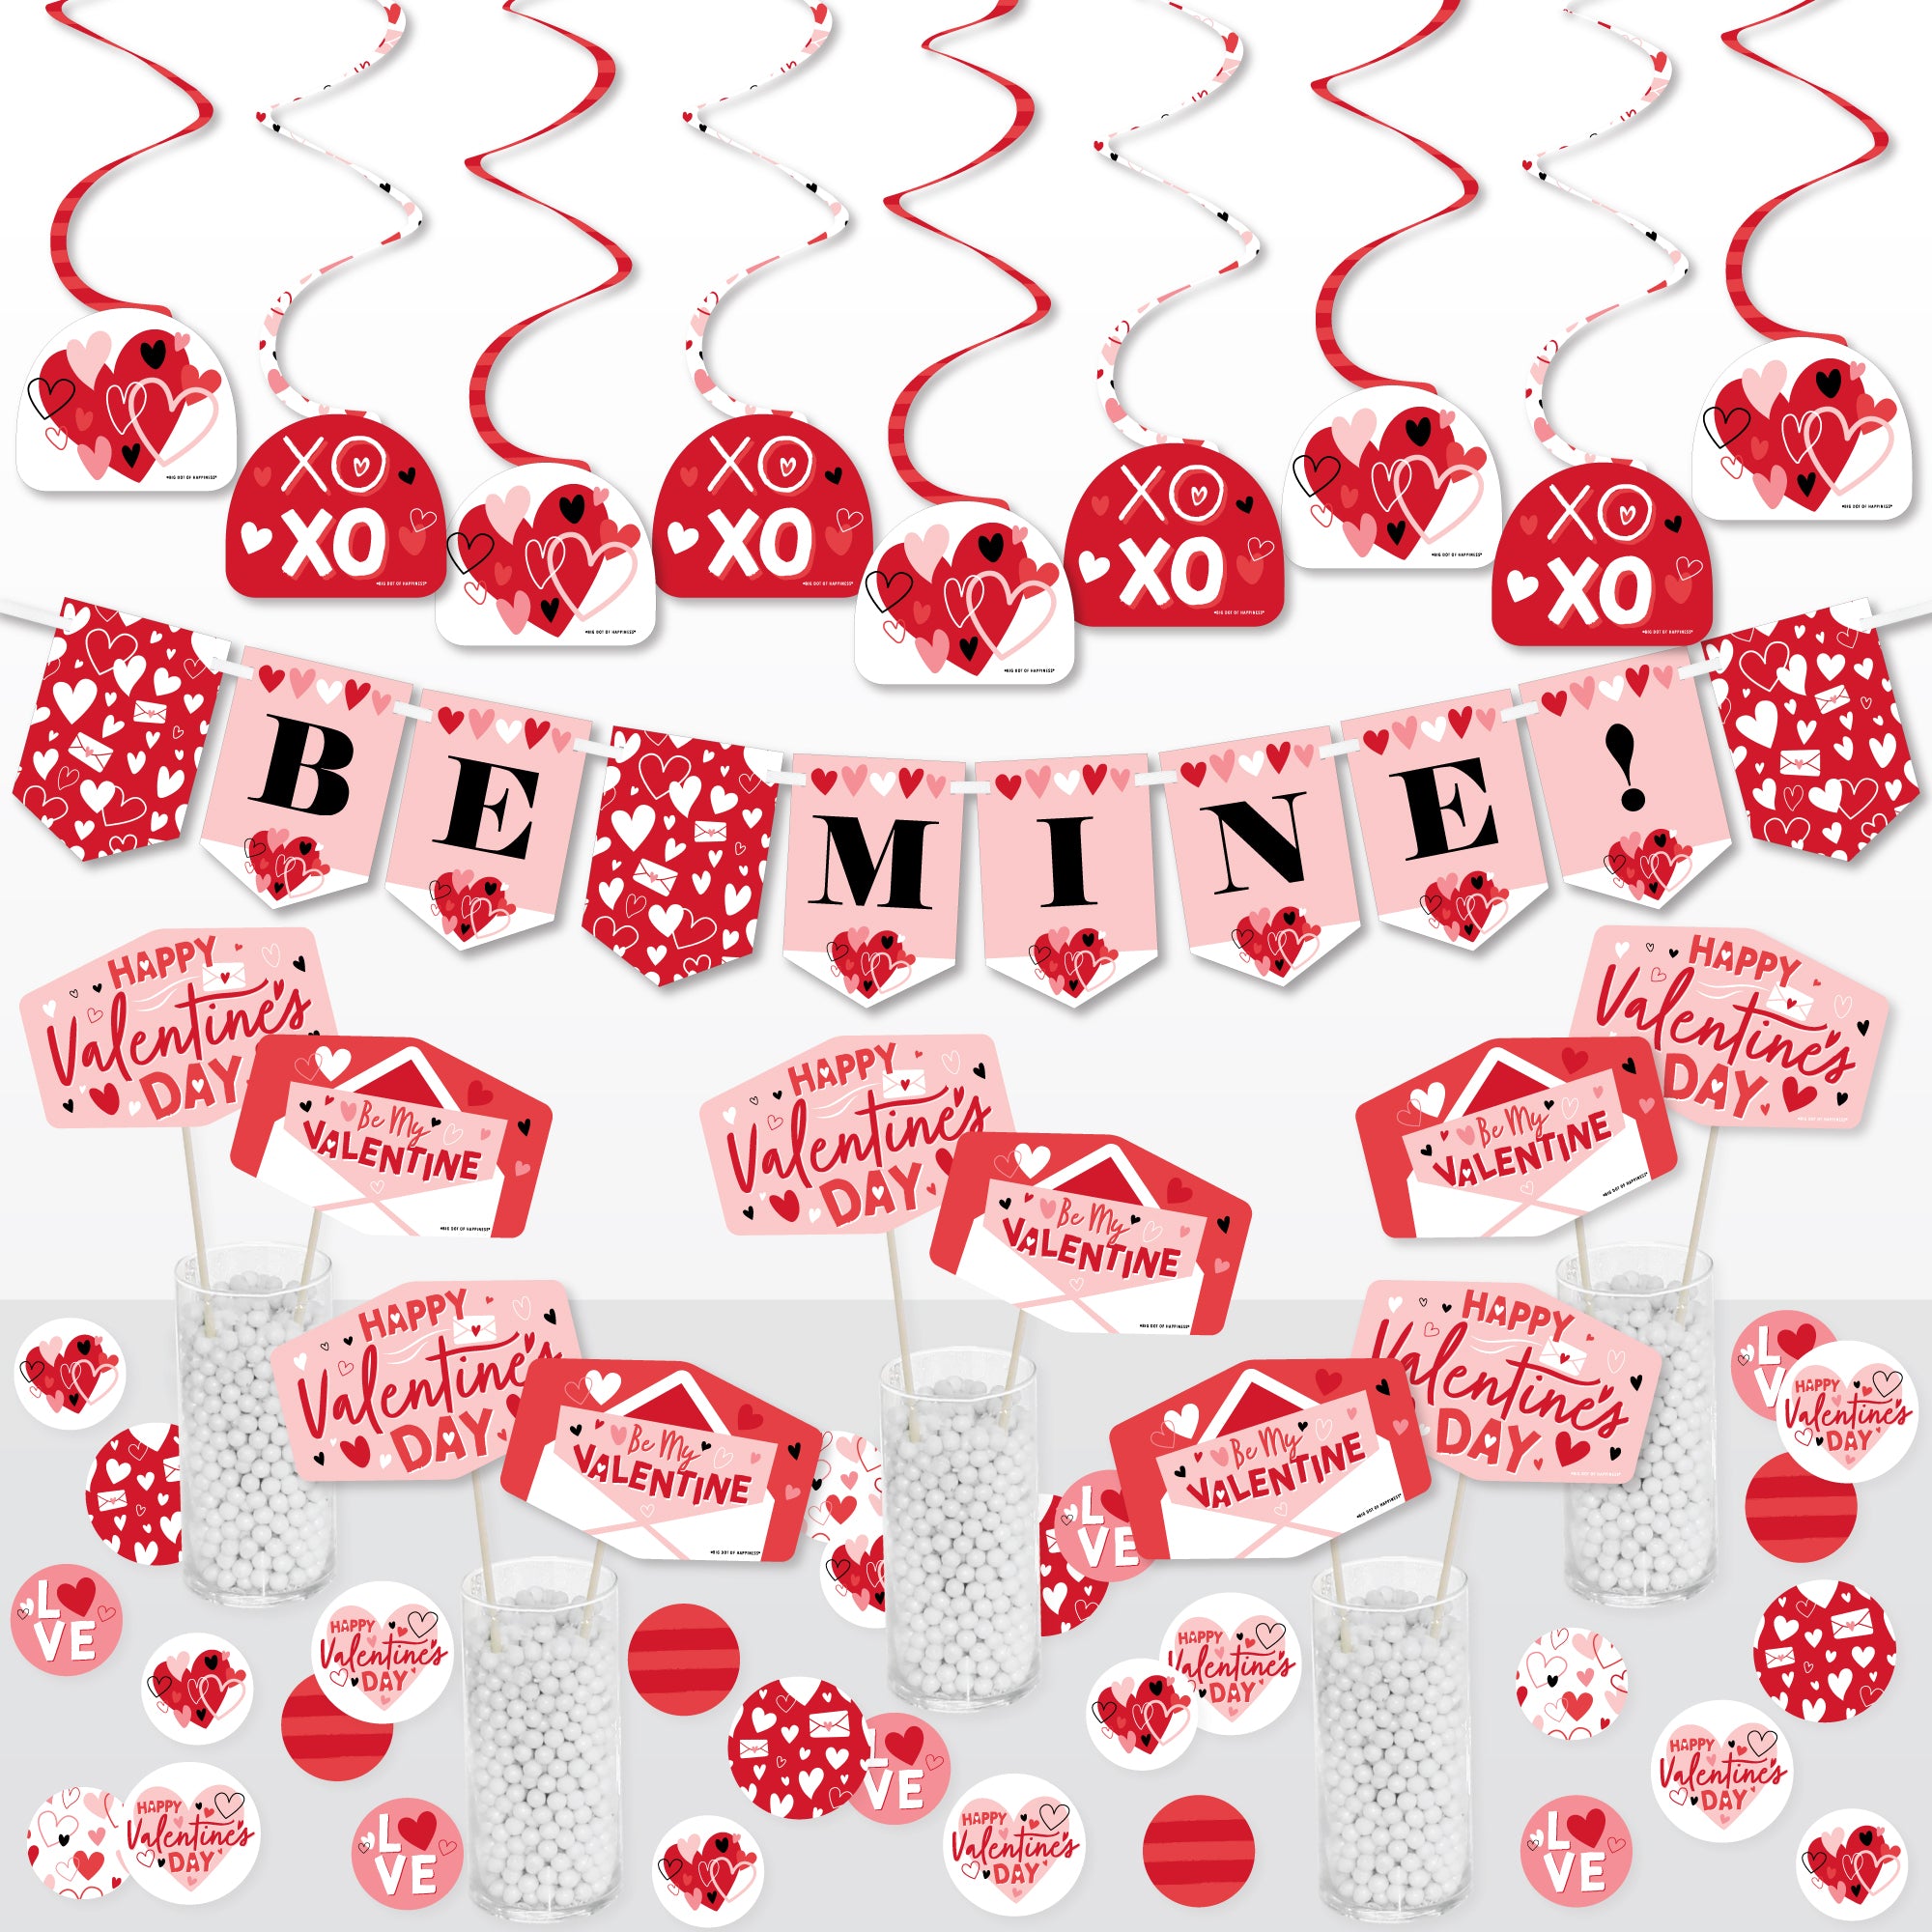 Paper Hearts Valentine's Day Decorations, 24ct